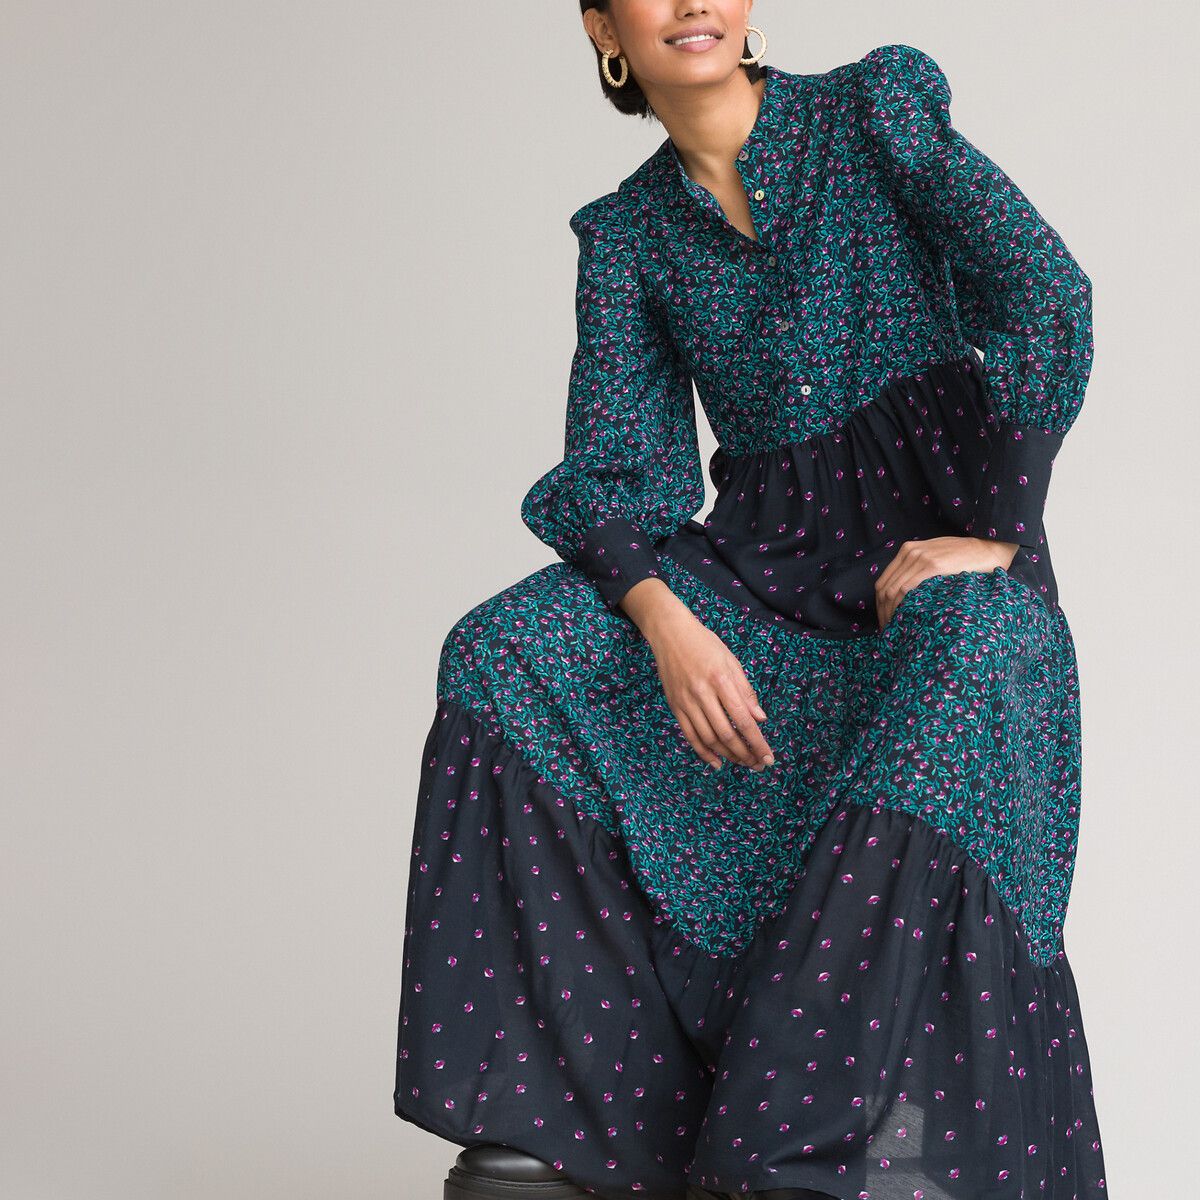 Recycled Floral Maxi Dress with High Neck and Long Puff Sleeves | La Redoute (UK)